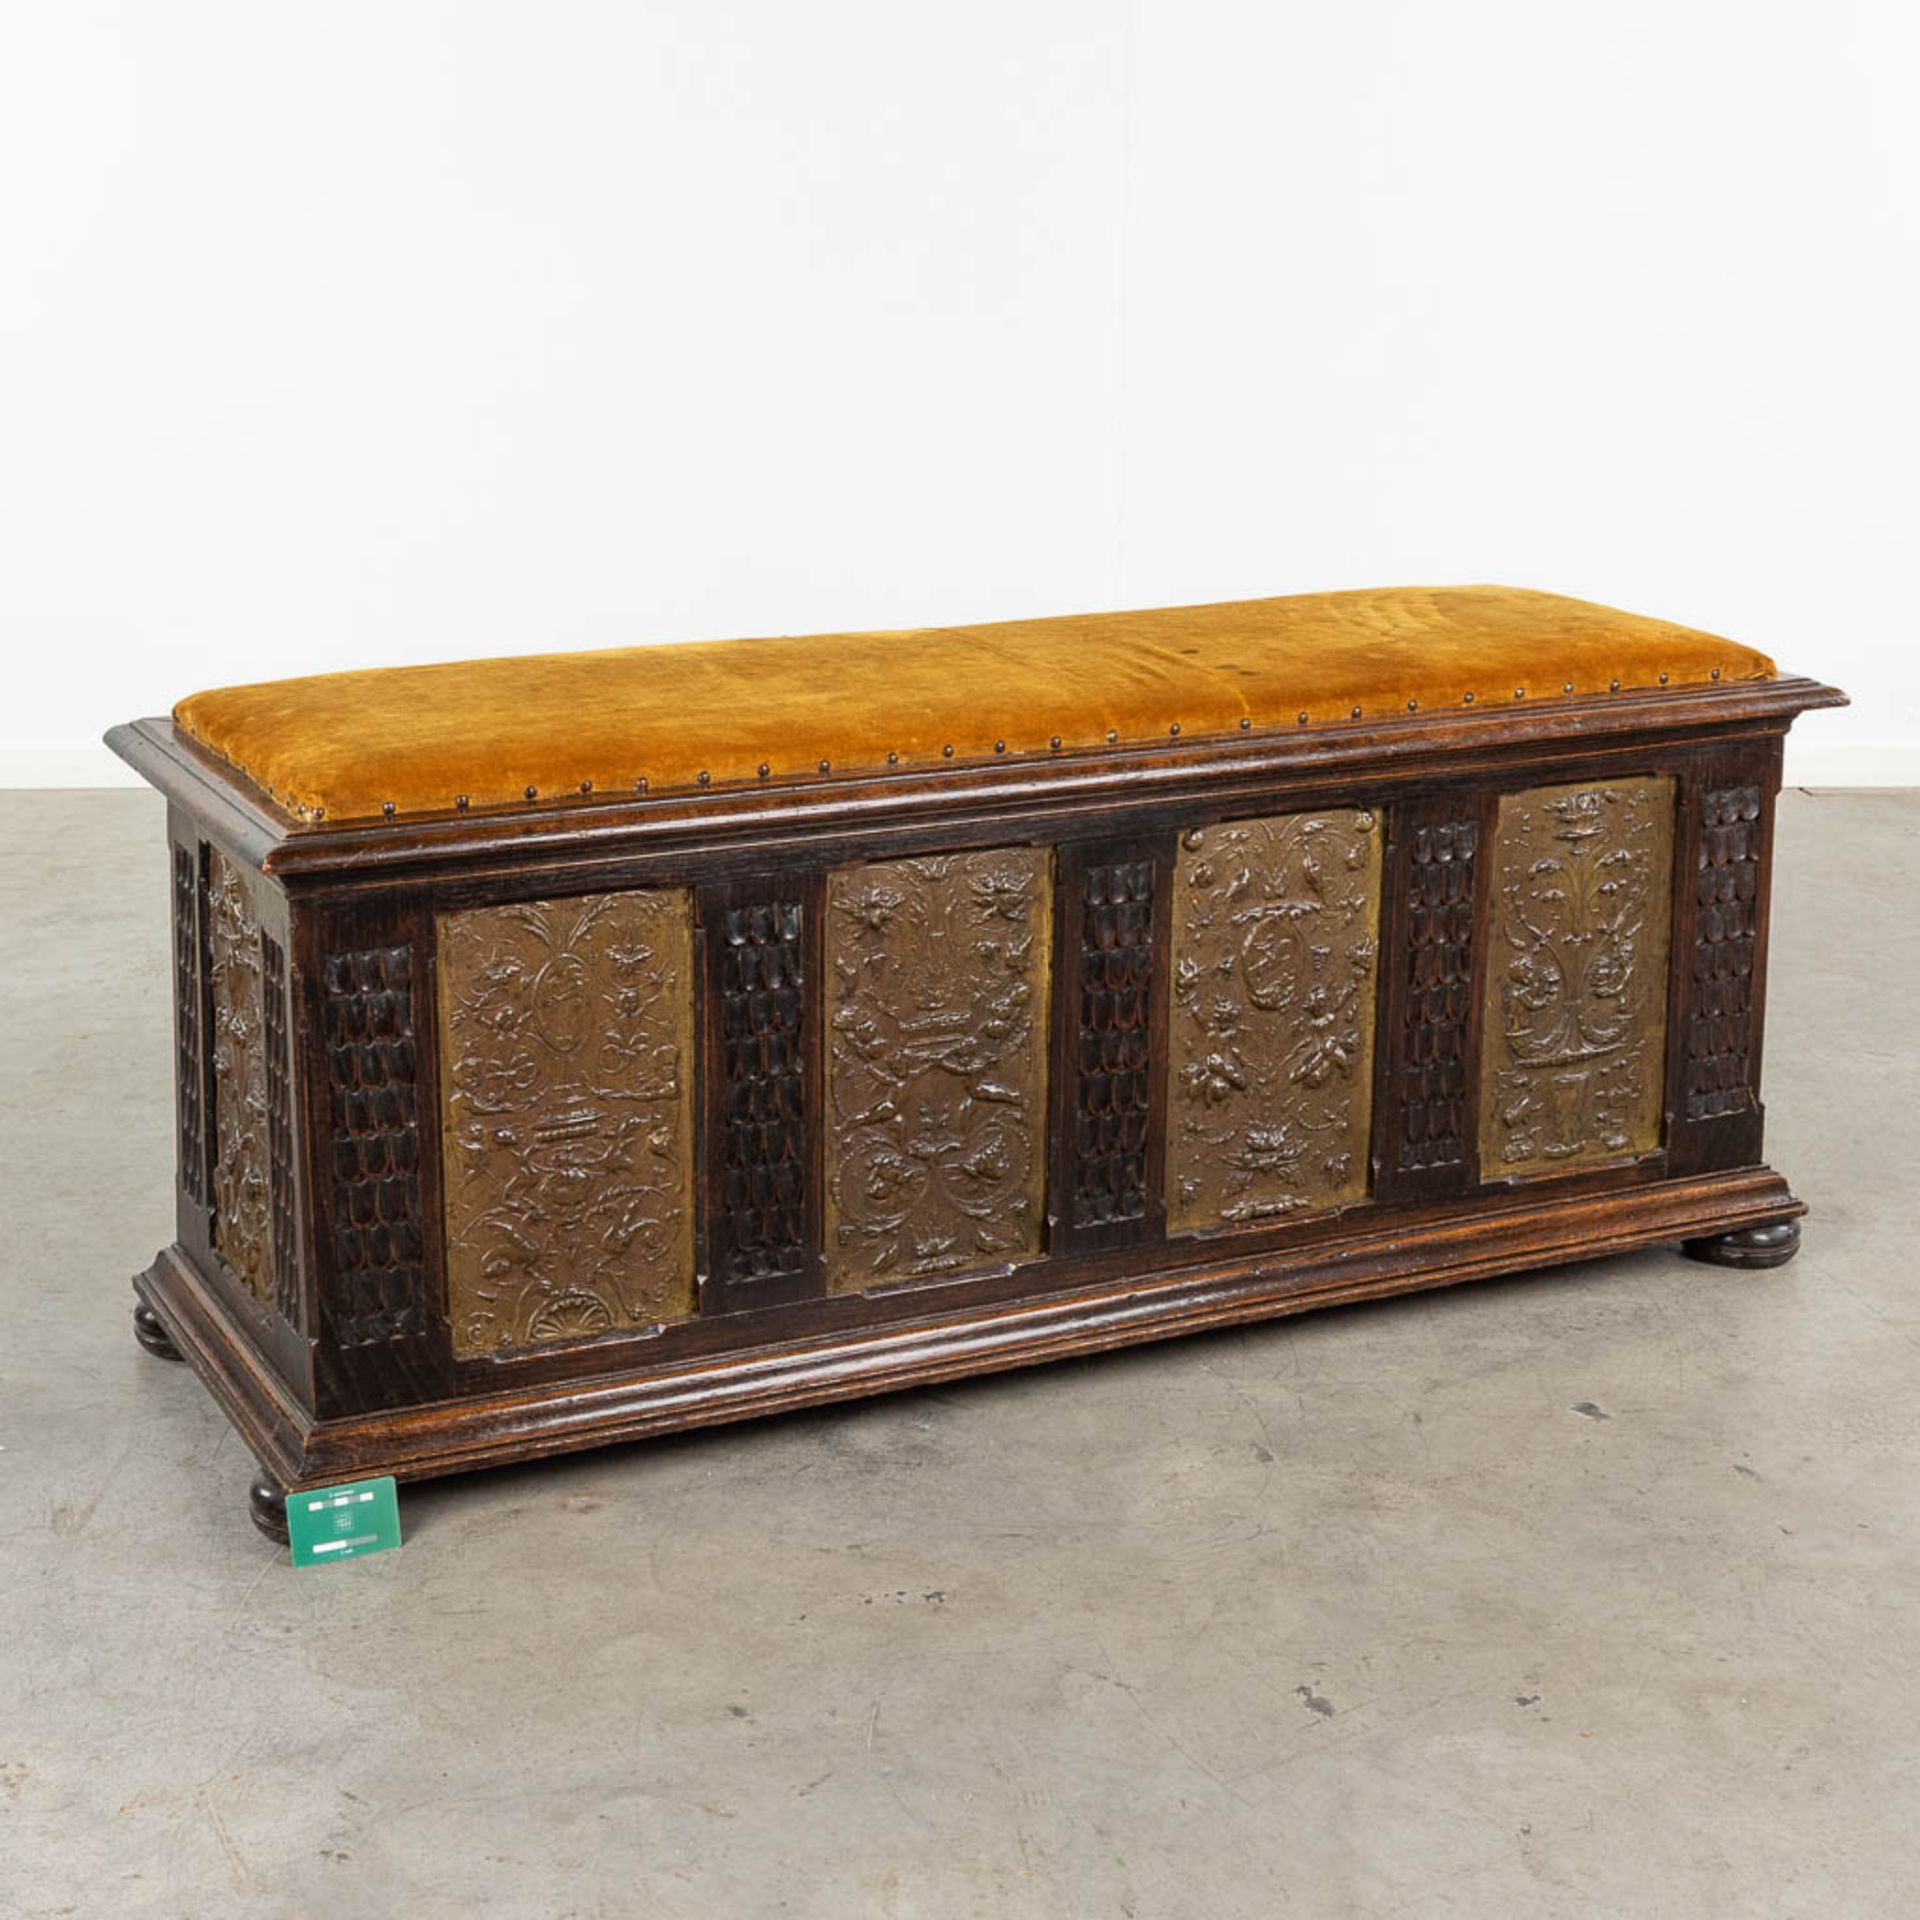 An antique chest and bench finished with dinanderie plaques. 19th C. (L: 50 x W: 148 x H: 60 cm) - Image 2 of 14